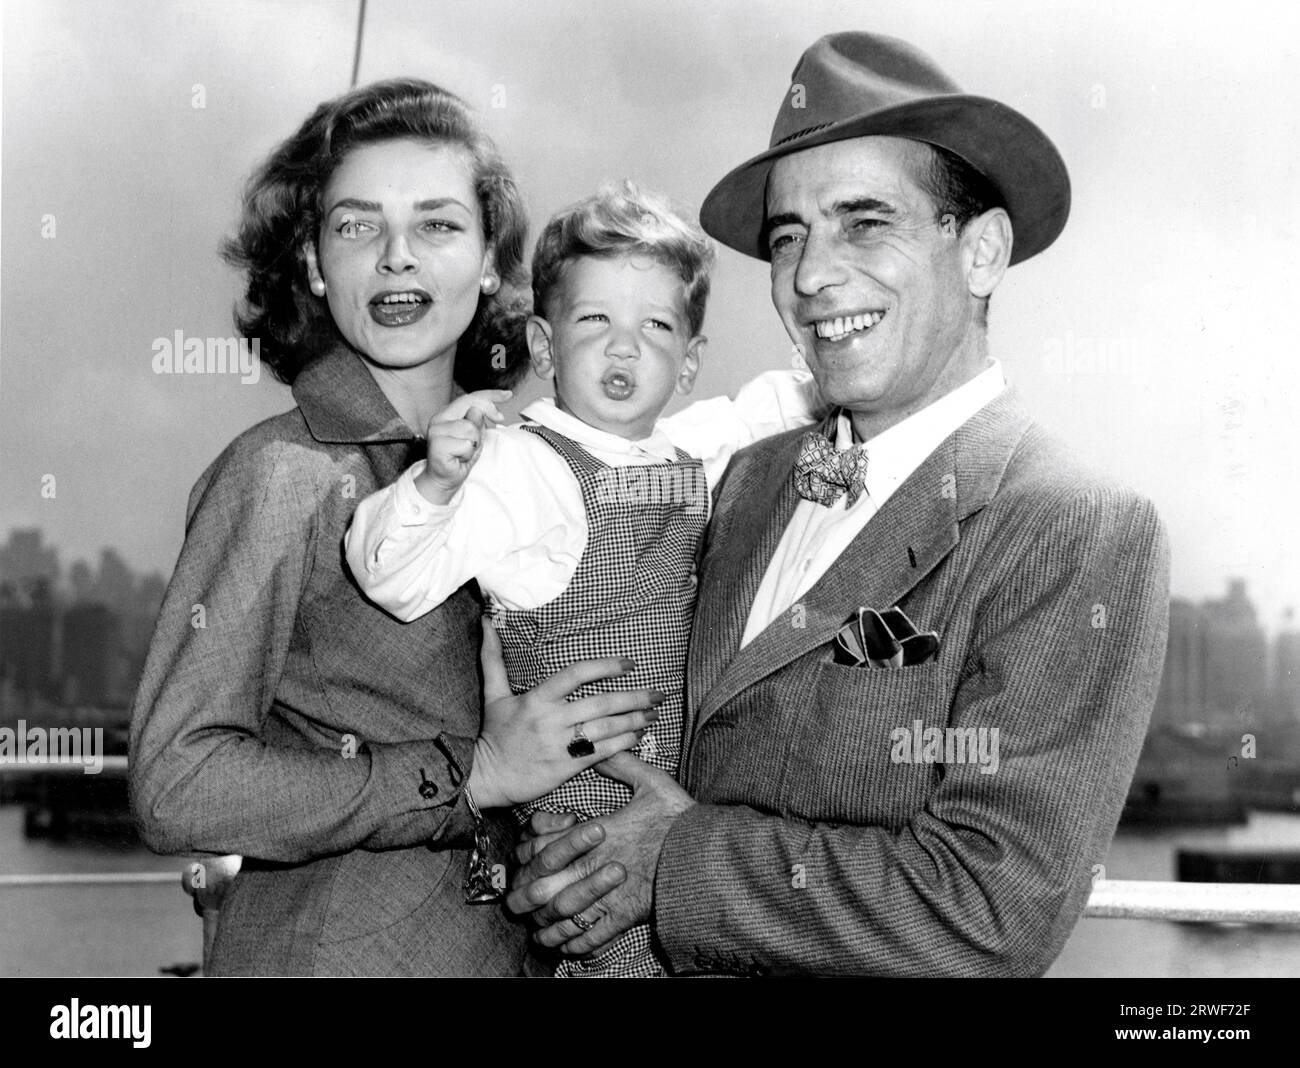 HUMPHREY BOGART and his wife LAUREN BACALL with their son STEPHEN BOGART on arrival in New York on September 14th 1951 on the French ocean liner Ile de France following completion of filming of The African Queen Stock Photo